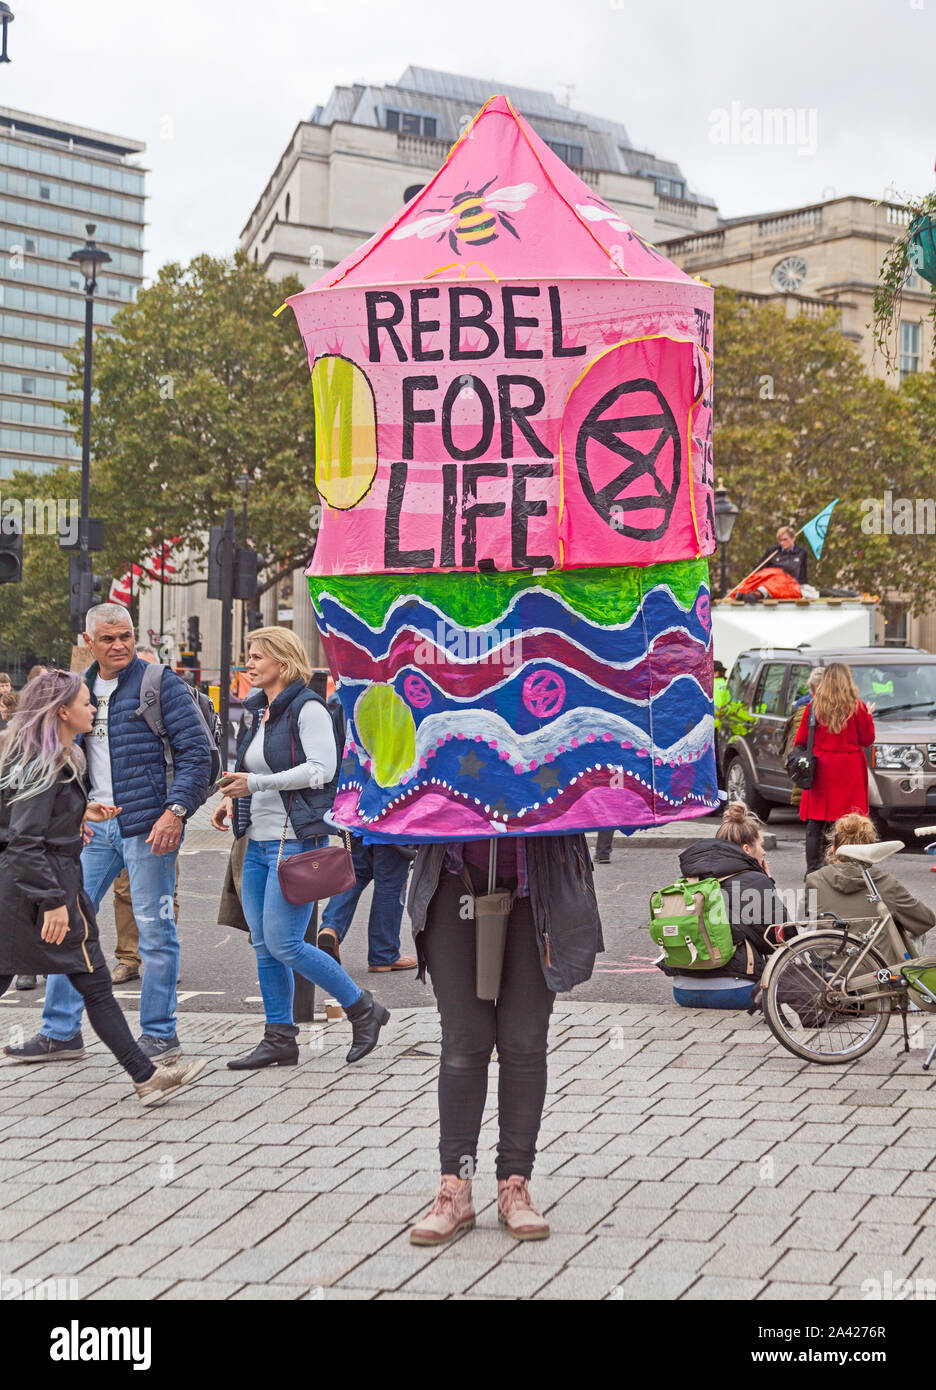 October 8th, 2019. The first day of Extinction Rebellion's occupation of Trafalgar Square.  A colourful modern equivalent of the sandwich board. Stock Photo